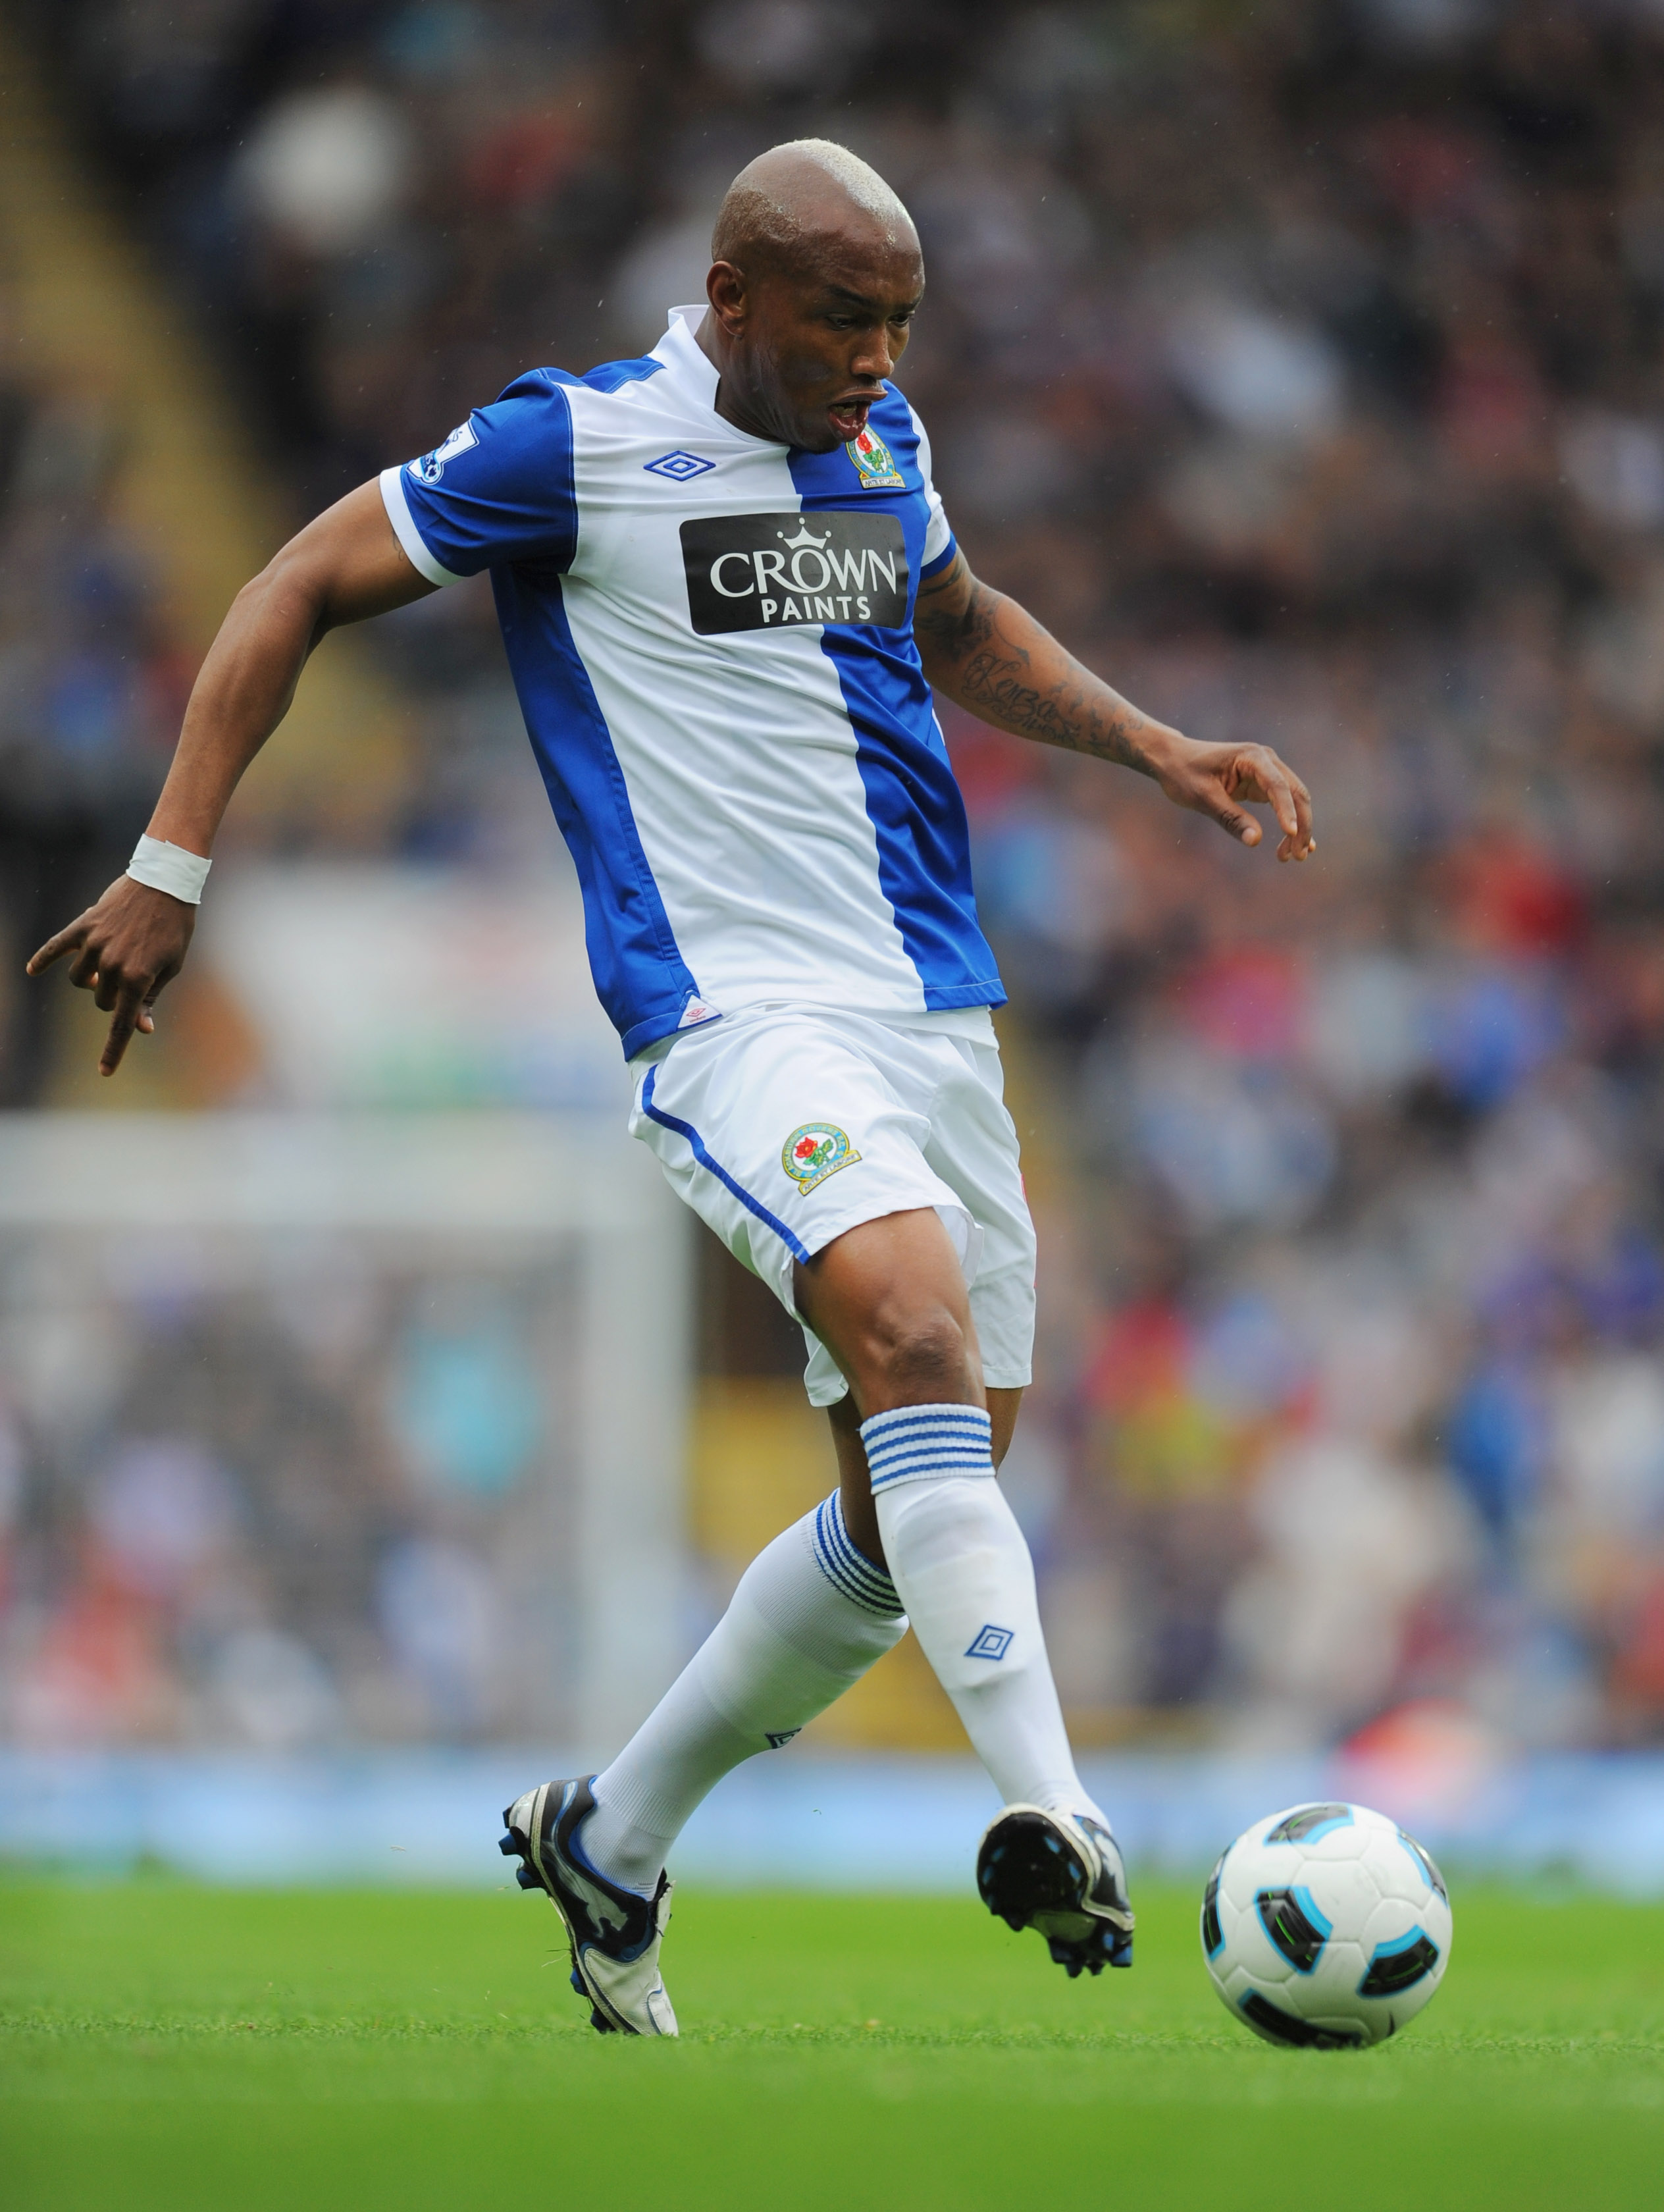 BLACKBURN, ENGLAND - SEPTEMBER 18: El-Hadji Diouf of Blackburn in action during the Barclays Premier League match between Blackburn Rovers and Fulham at Ewood park on September 18, 2010 in Blackburn, England.  (Photo by Michael Regan/Getty Images)